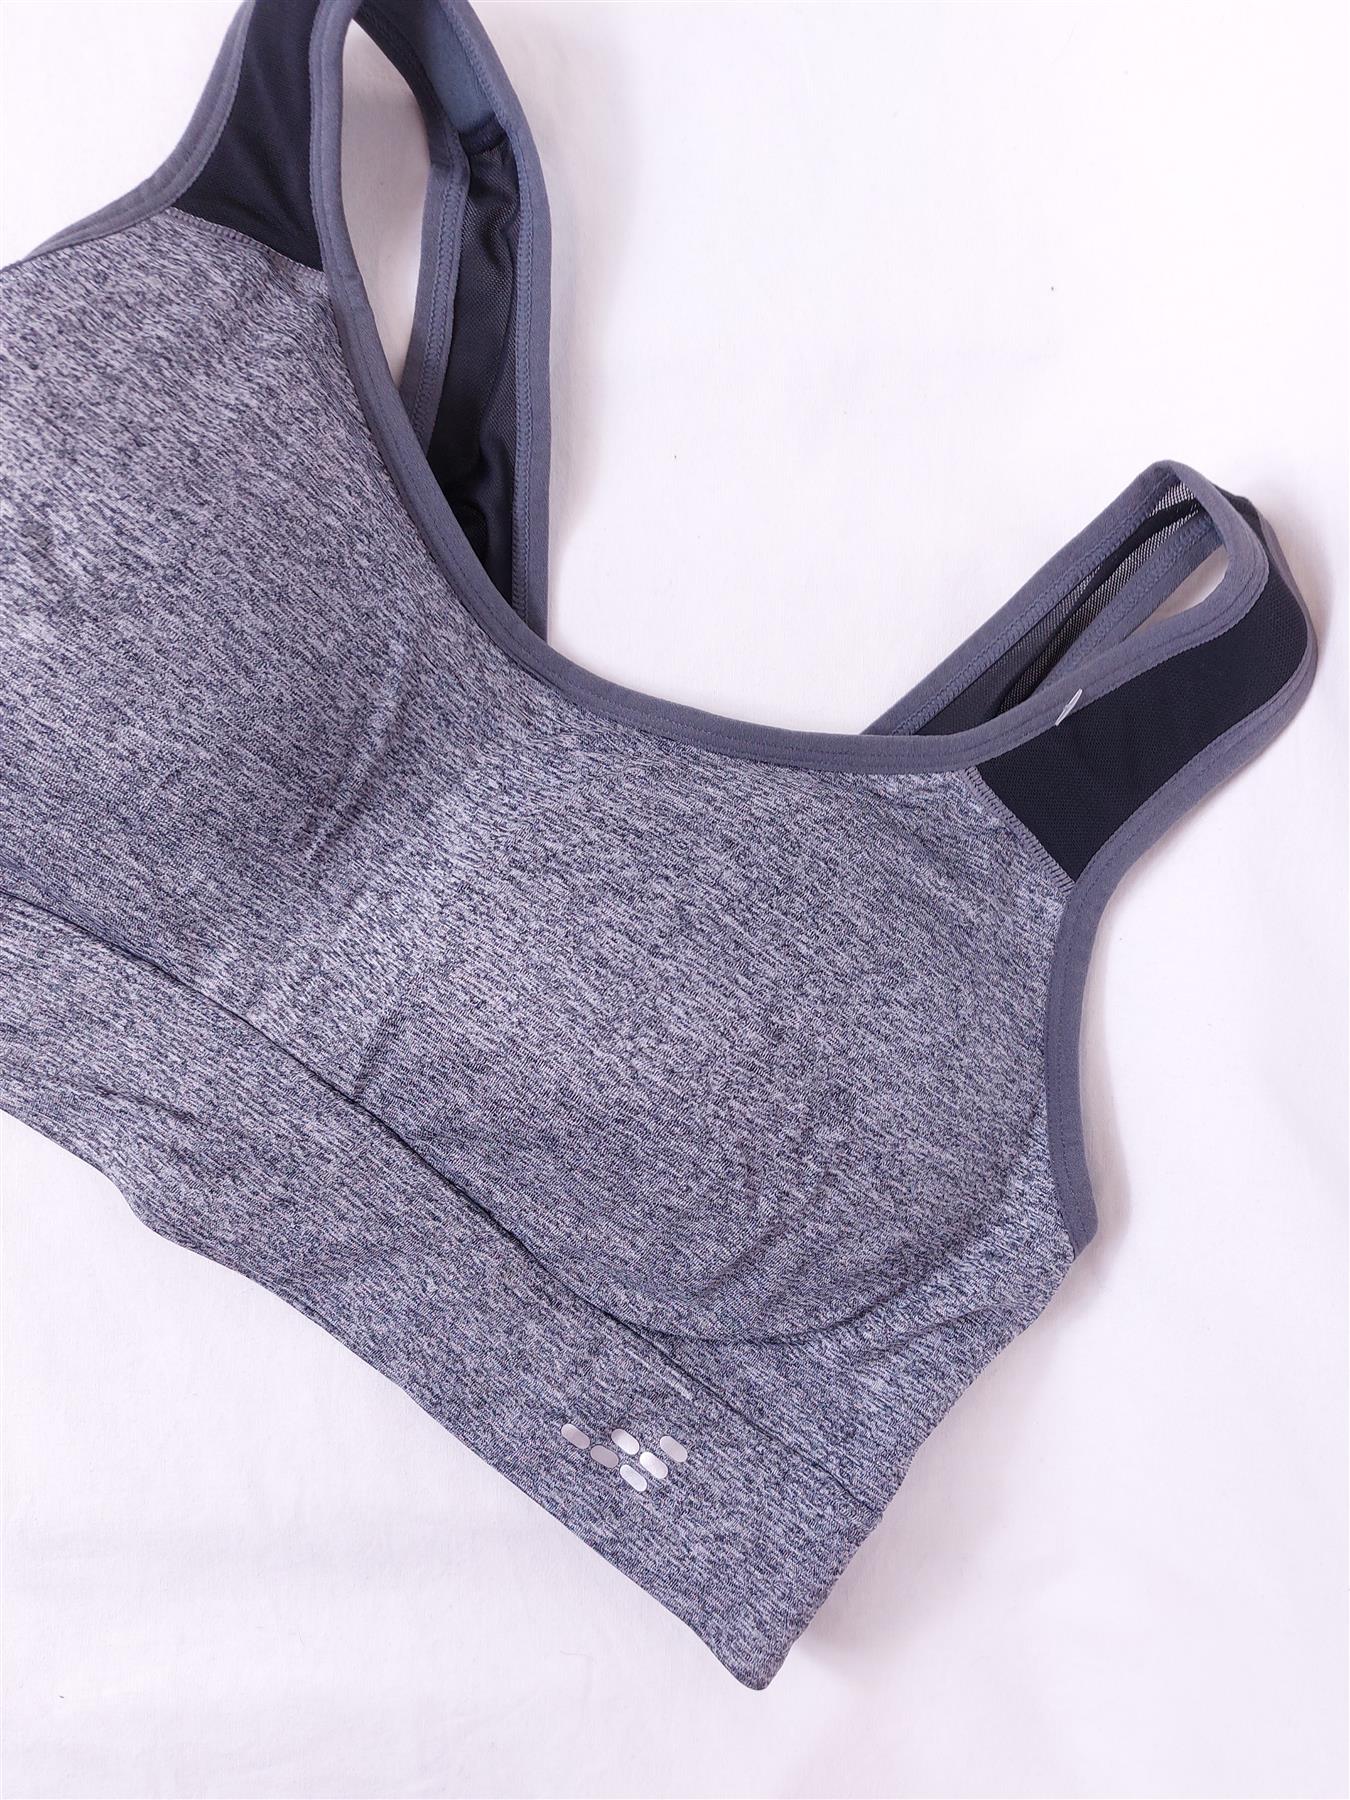 BCG Sports Bra Yoga Top Medium Impact Non-Wired Padded Mesh Back Gym Workout